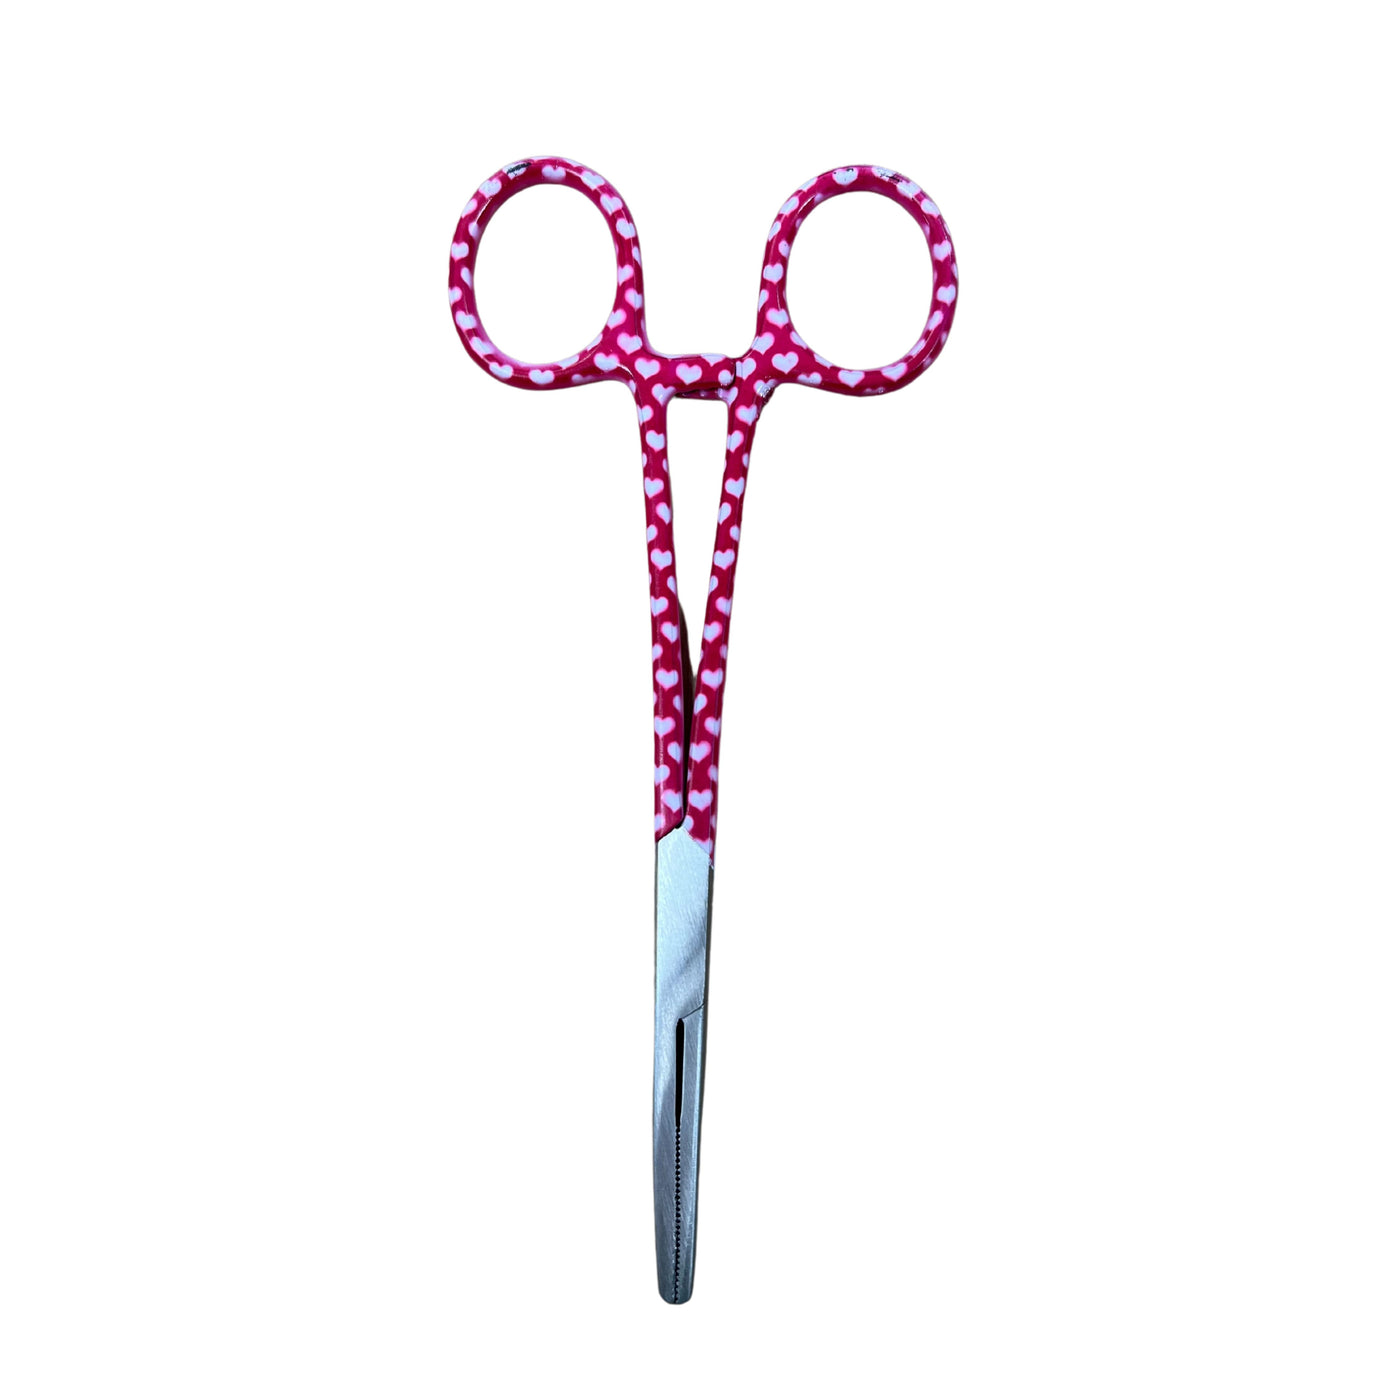 CLEARANCE - Pink & White Heart Forceps